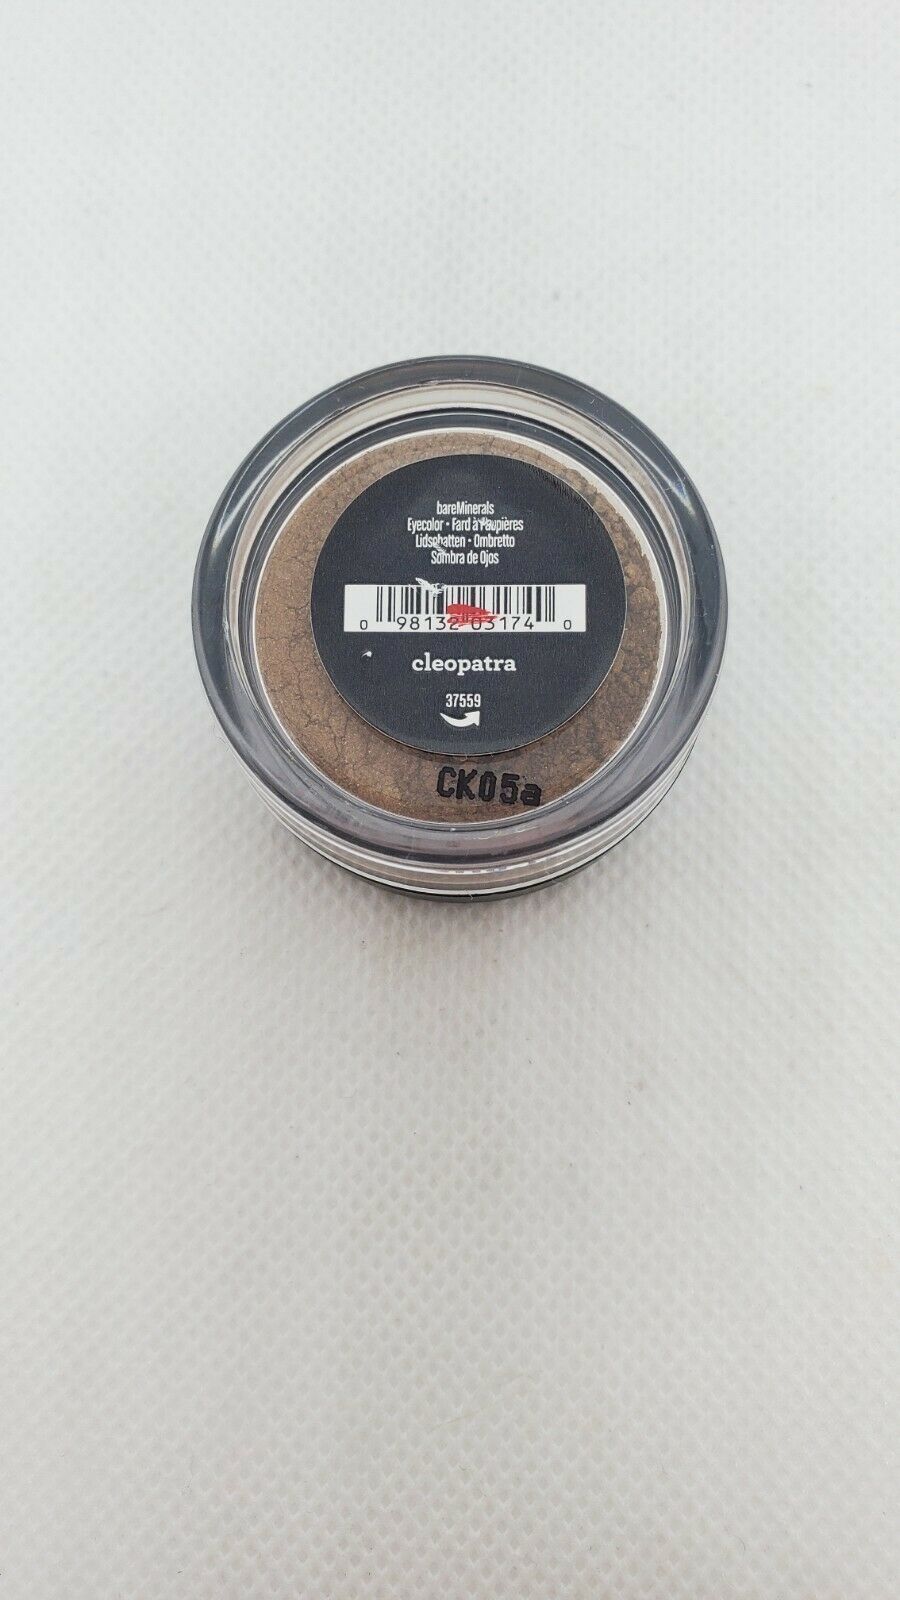 Primary image for New bareMinerals Eye Shadow Eye Color in  Cleopatra 37559 .57g Loose Powder